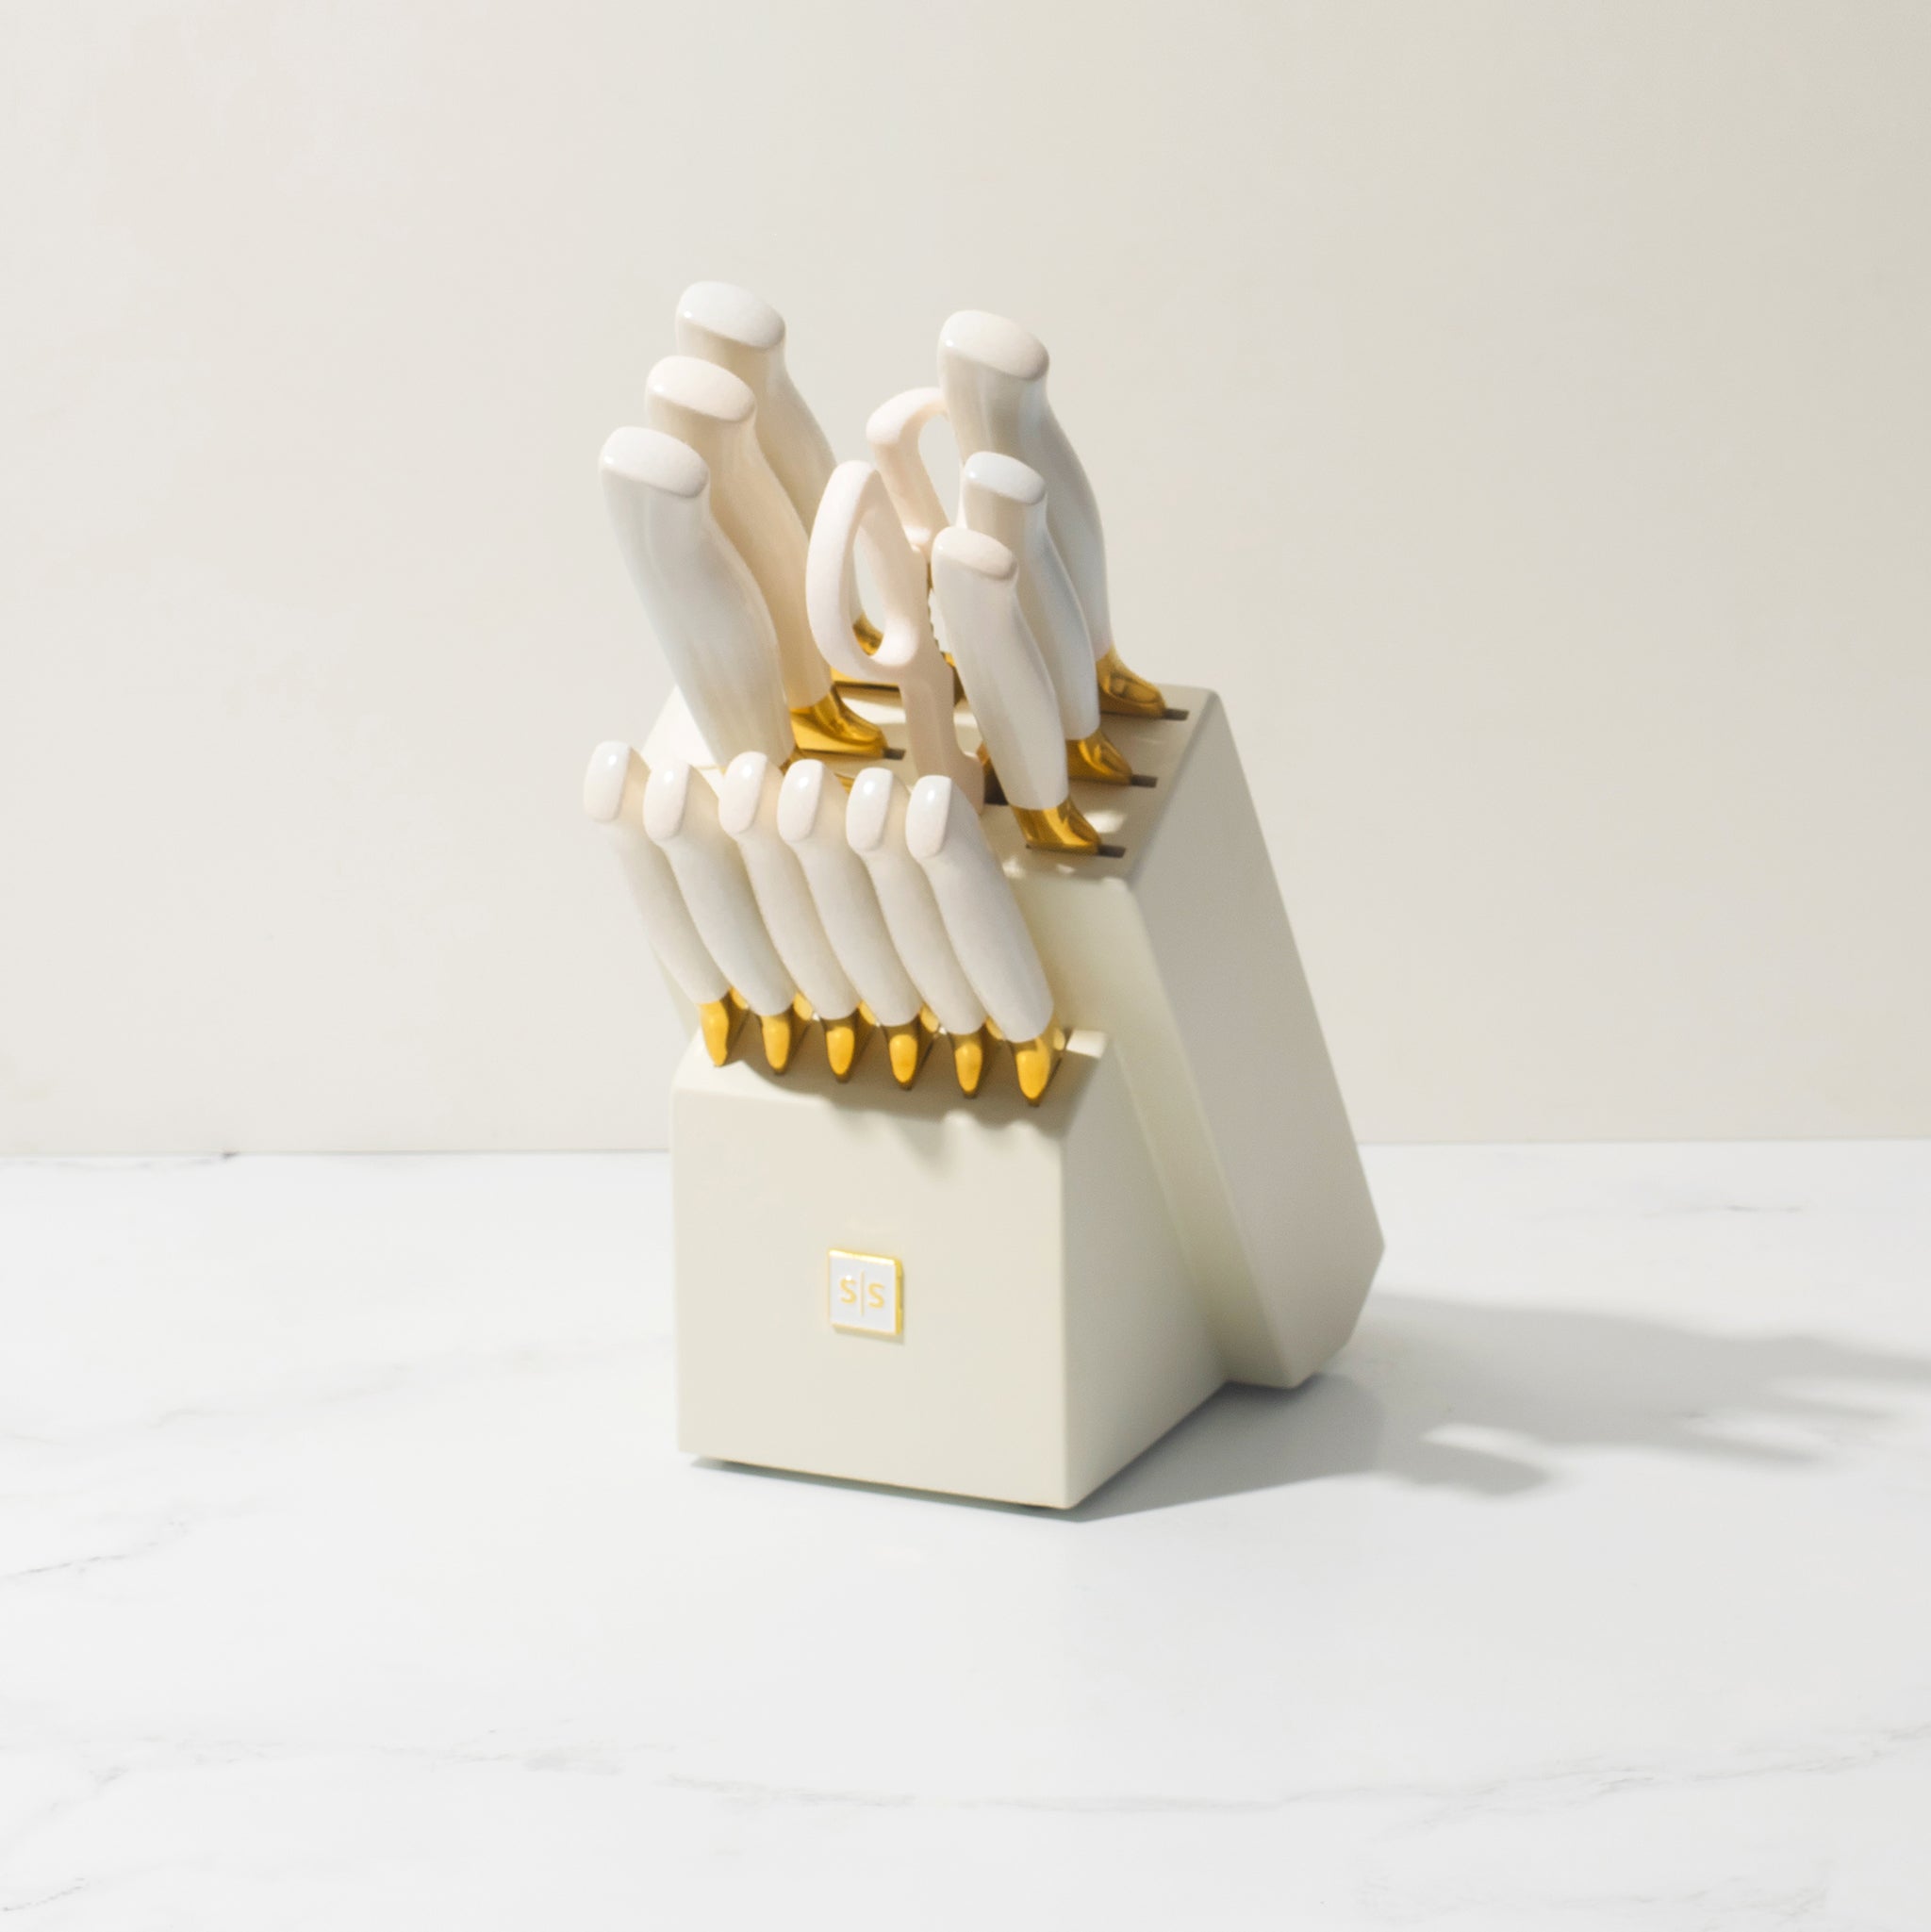 White and Gold Knife Set with White Self-Sharpening Block - Styled Settings